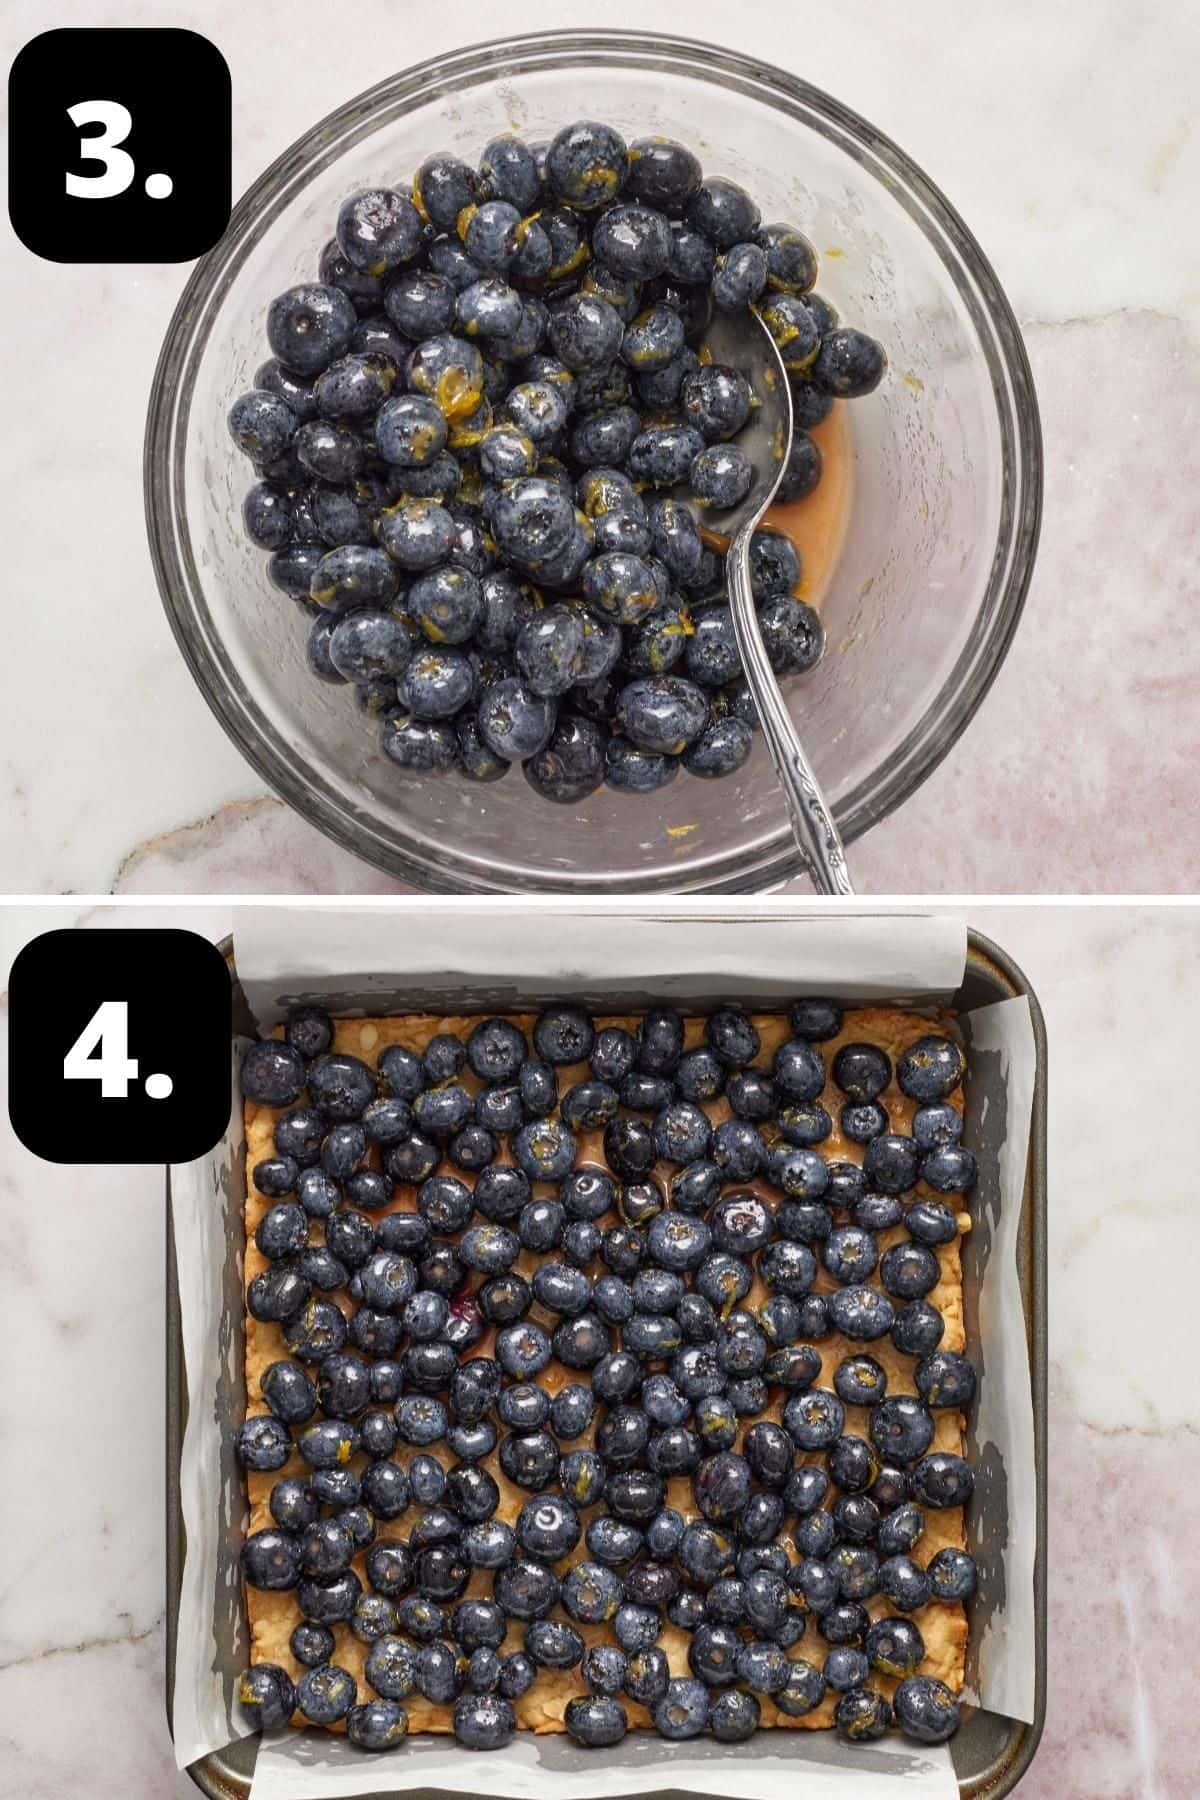 Steps 3-4 of preparing this recipe: the blueberries being tossed in a bowl and on top of the base.